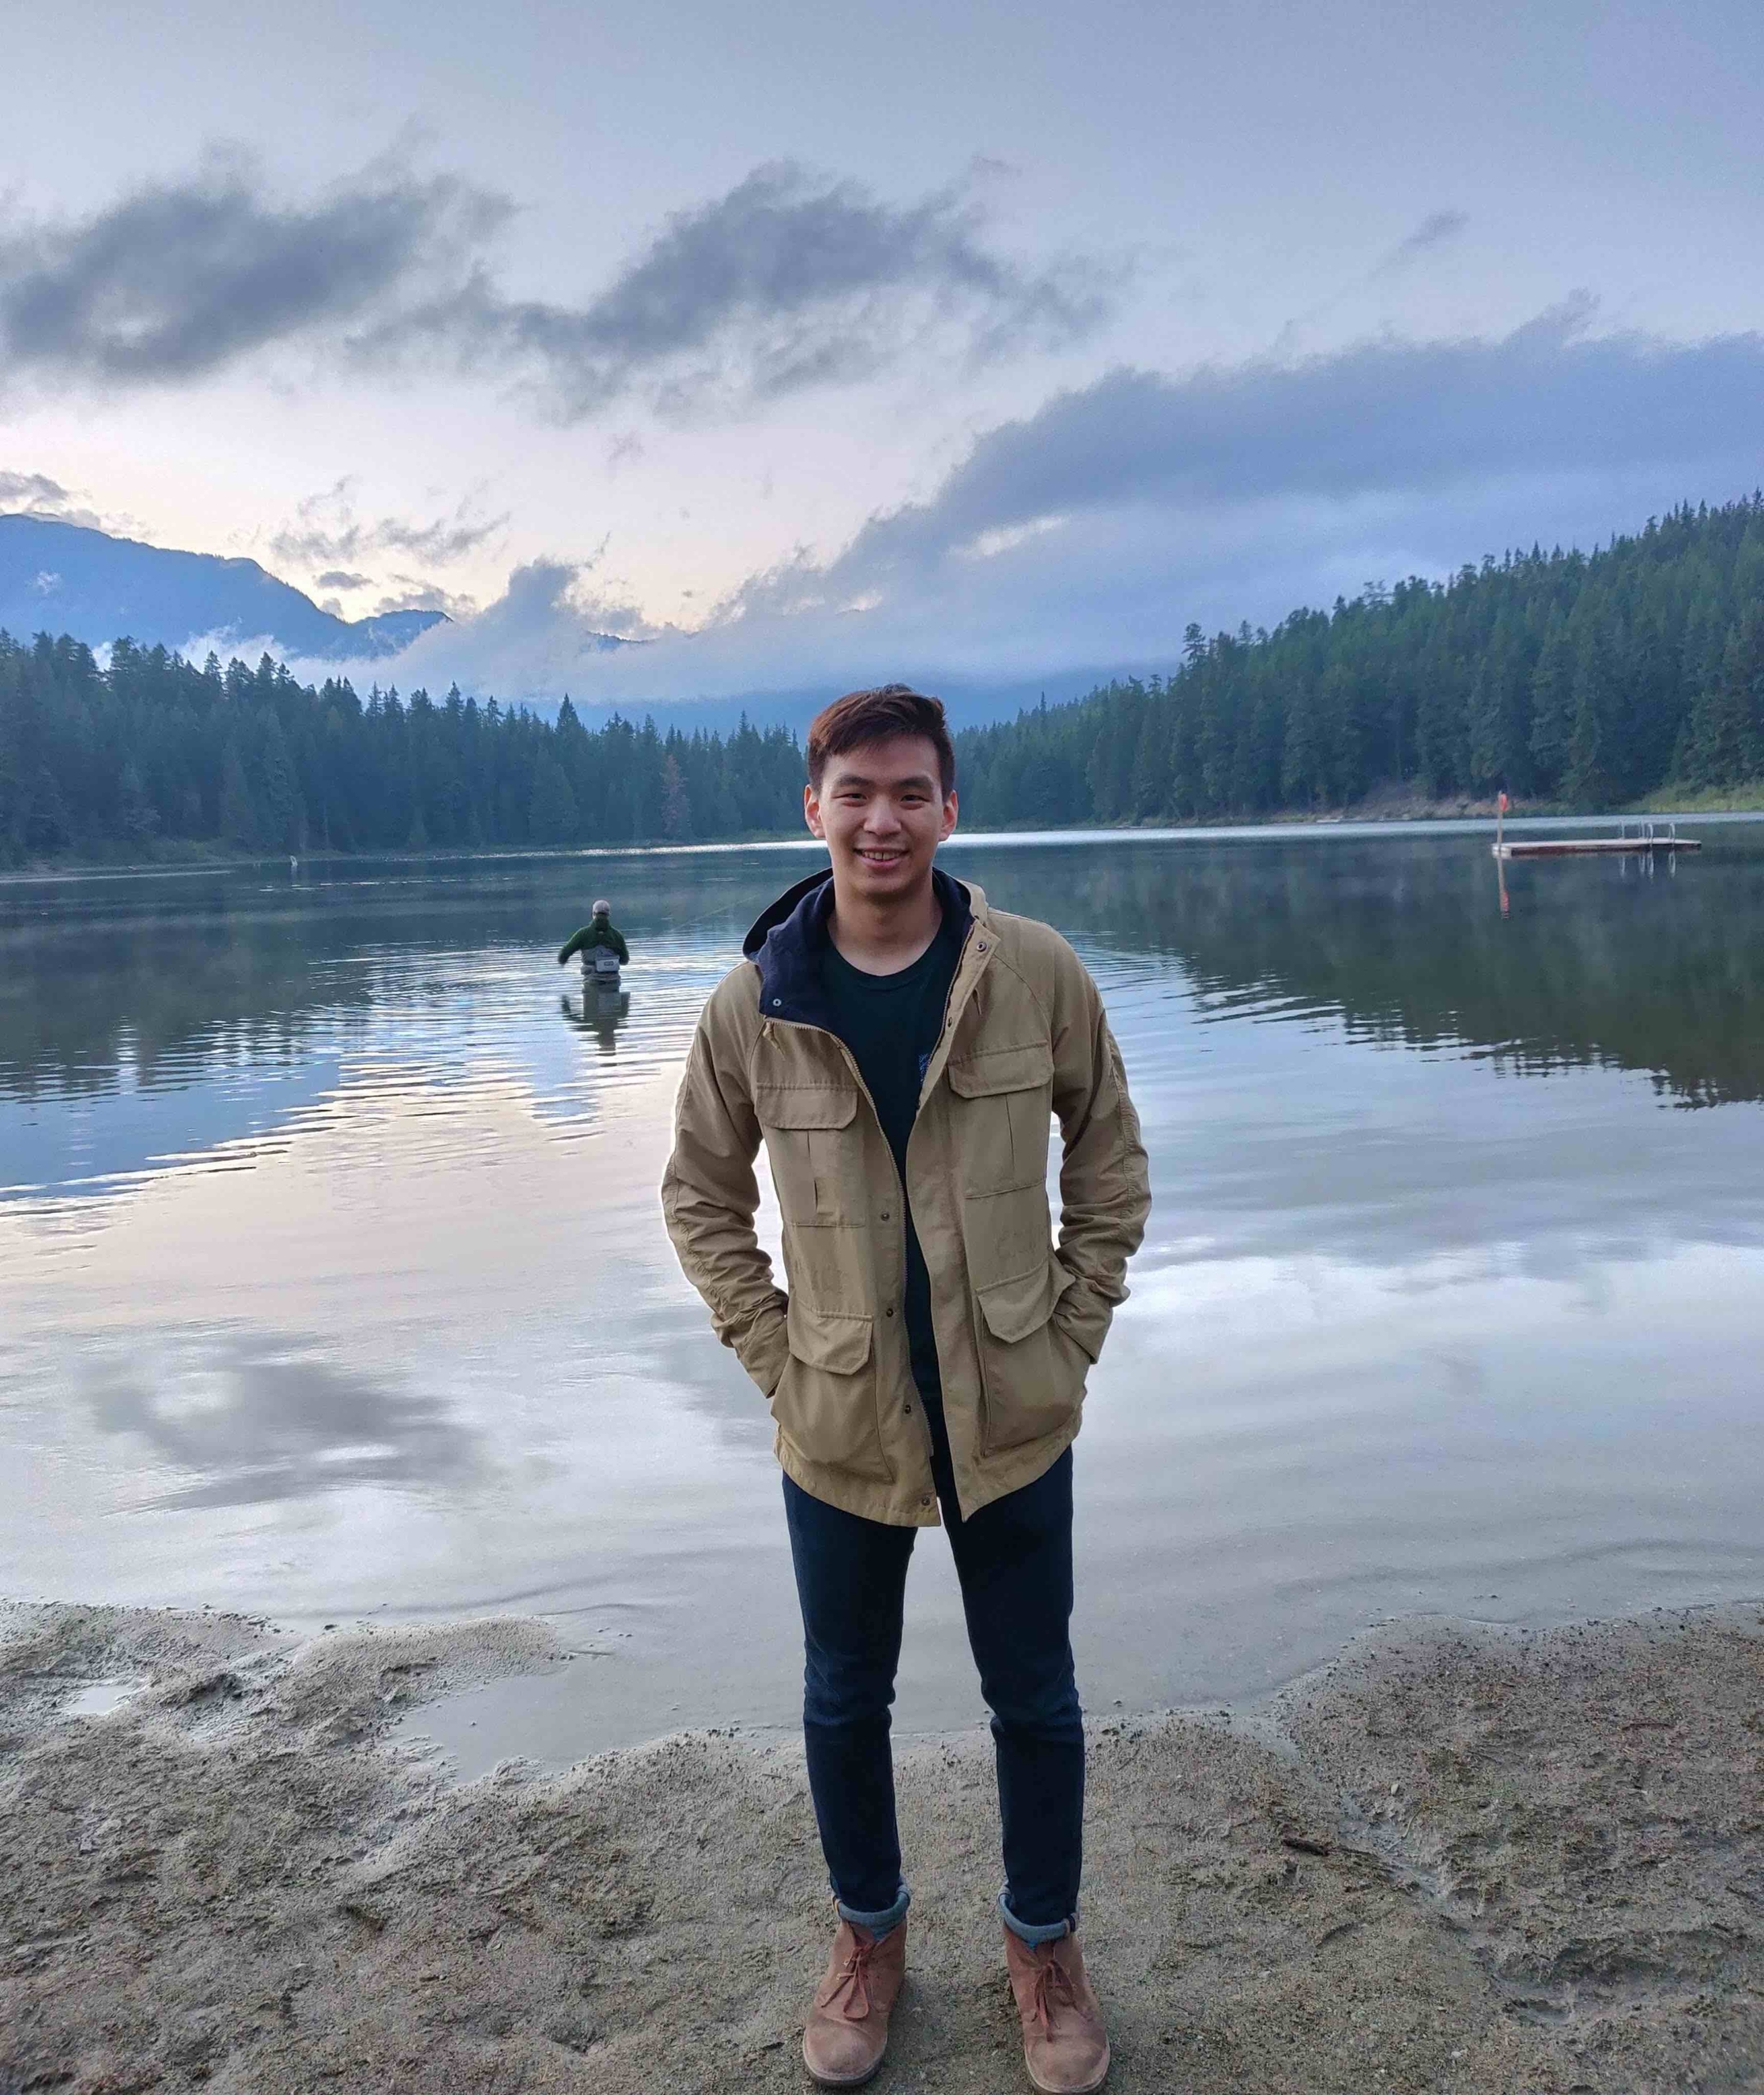 Profile image of Sam Liu standing in front of a lake, full body.